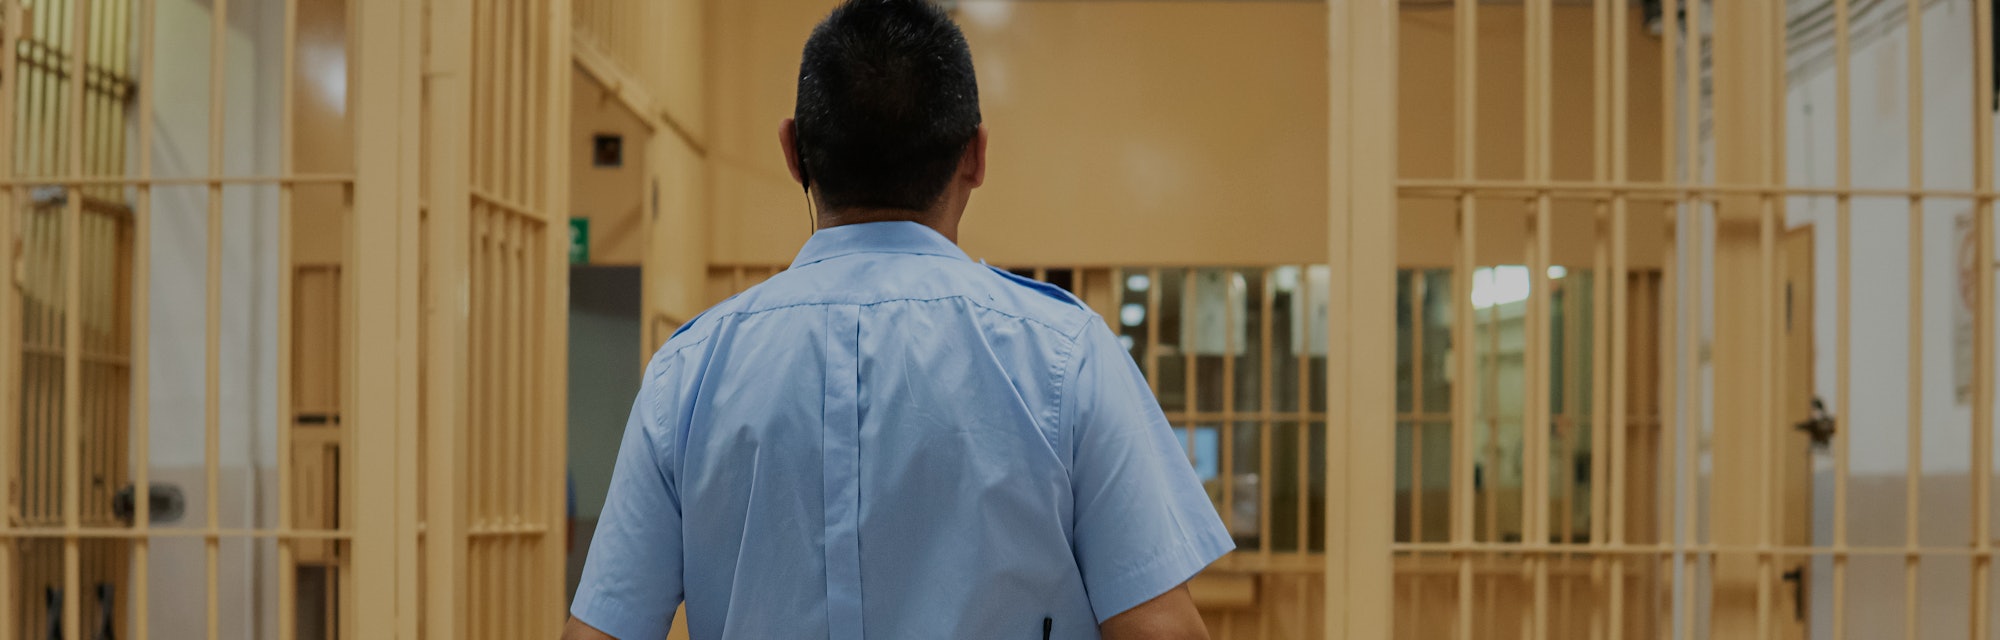 Jailer walking through the prison aisle, entering the safe zone. Prison officer in  blue shirt with ...